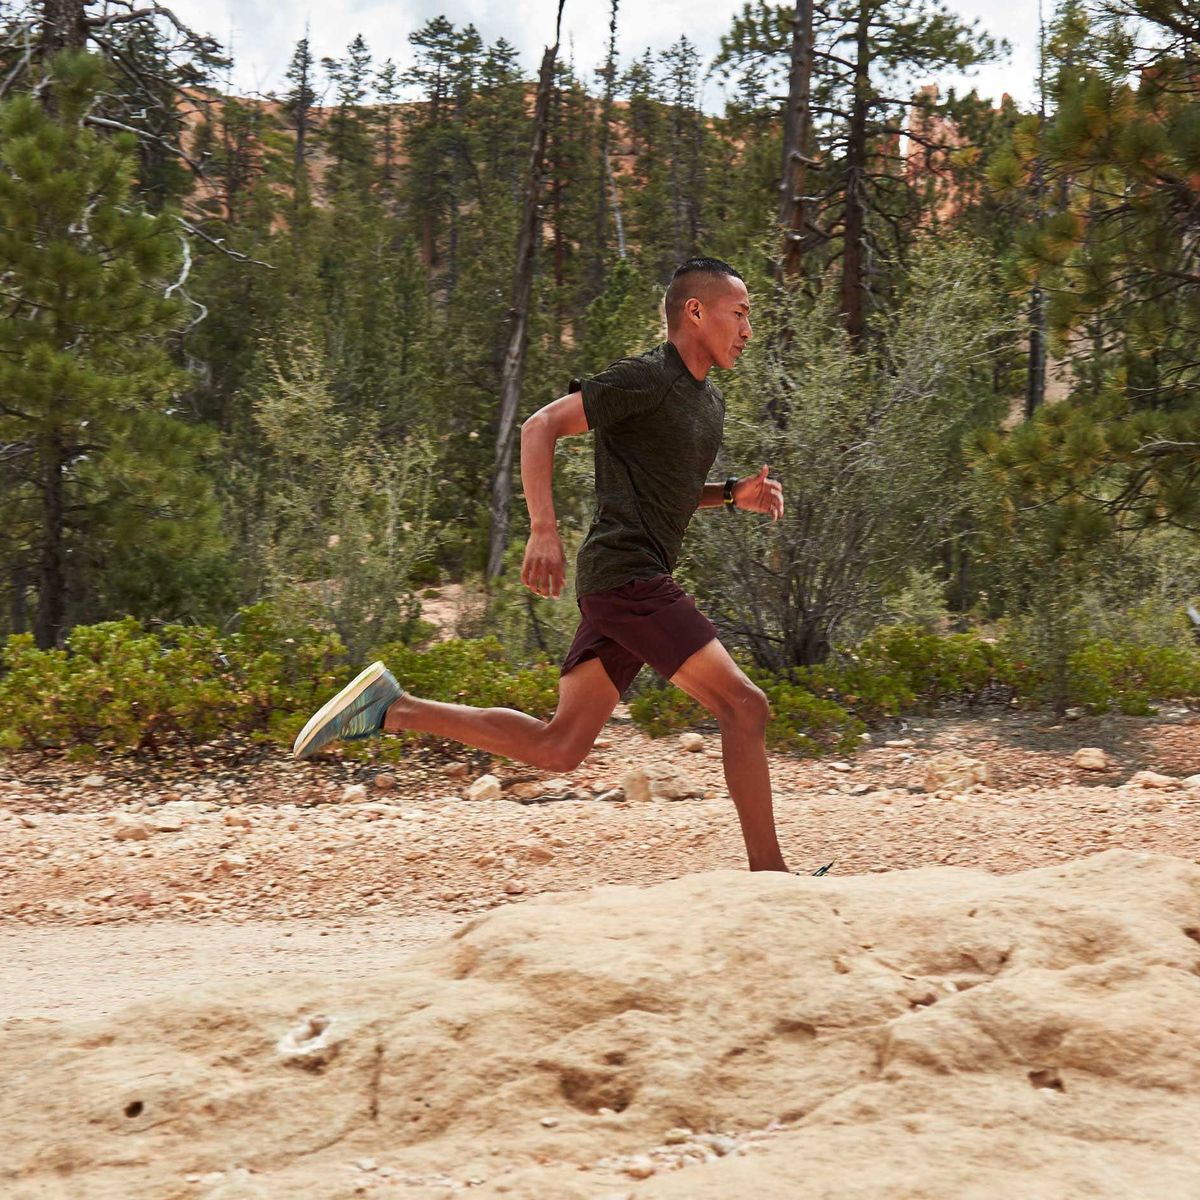 Sand, Recreation, Tree, Fun, Soil, Running, Trail, Vacation, Landscape, Forest, 